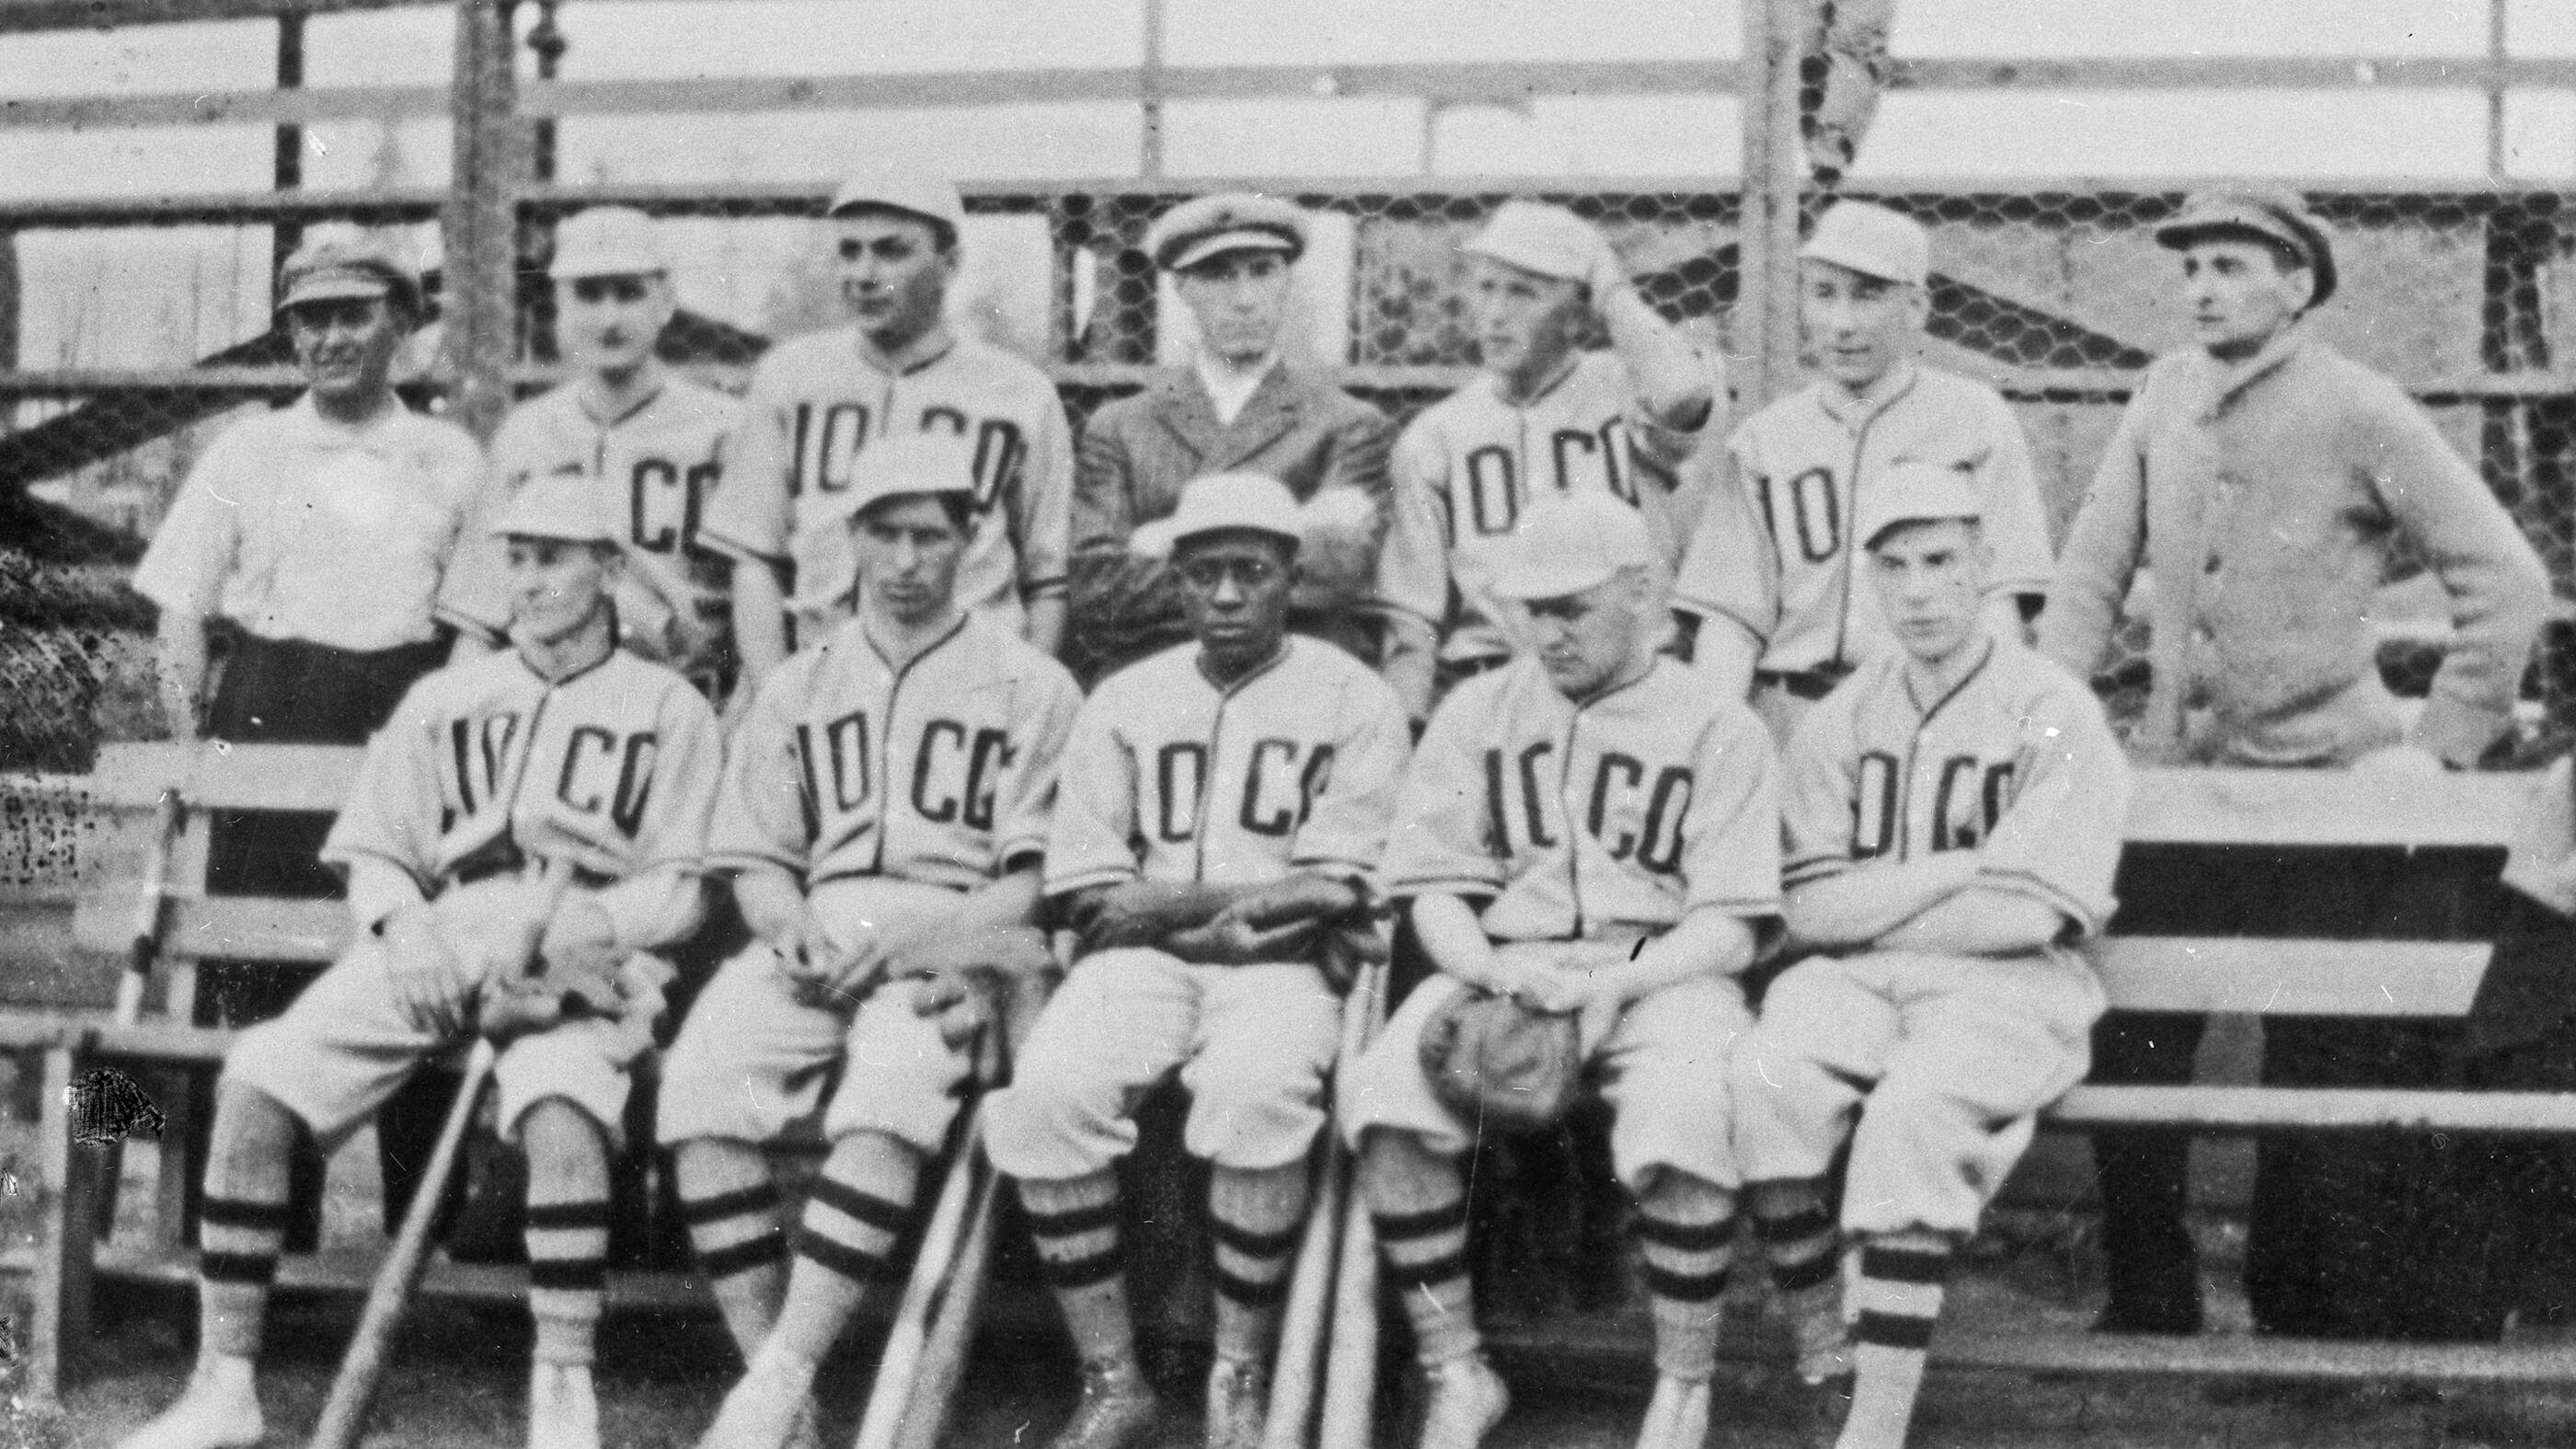 Imperial forms a subsidiary, the International Petroleum Company, Limited, to search for oil in South America.
Imperial builds a refinery at Burrard Inlet, east of Vancouver. Pictured is the Refinery baseball team in 1918/1919.